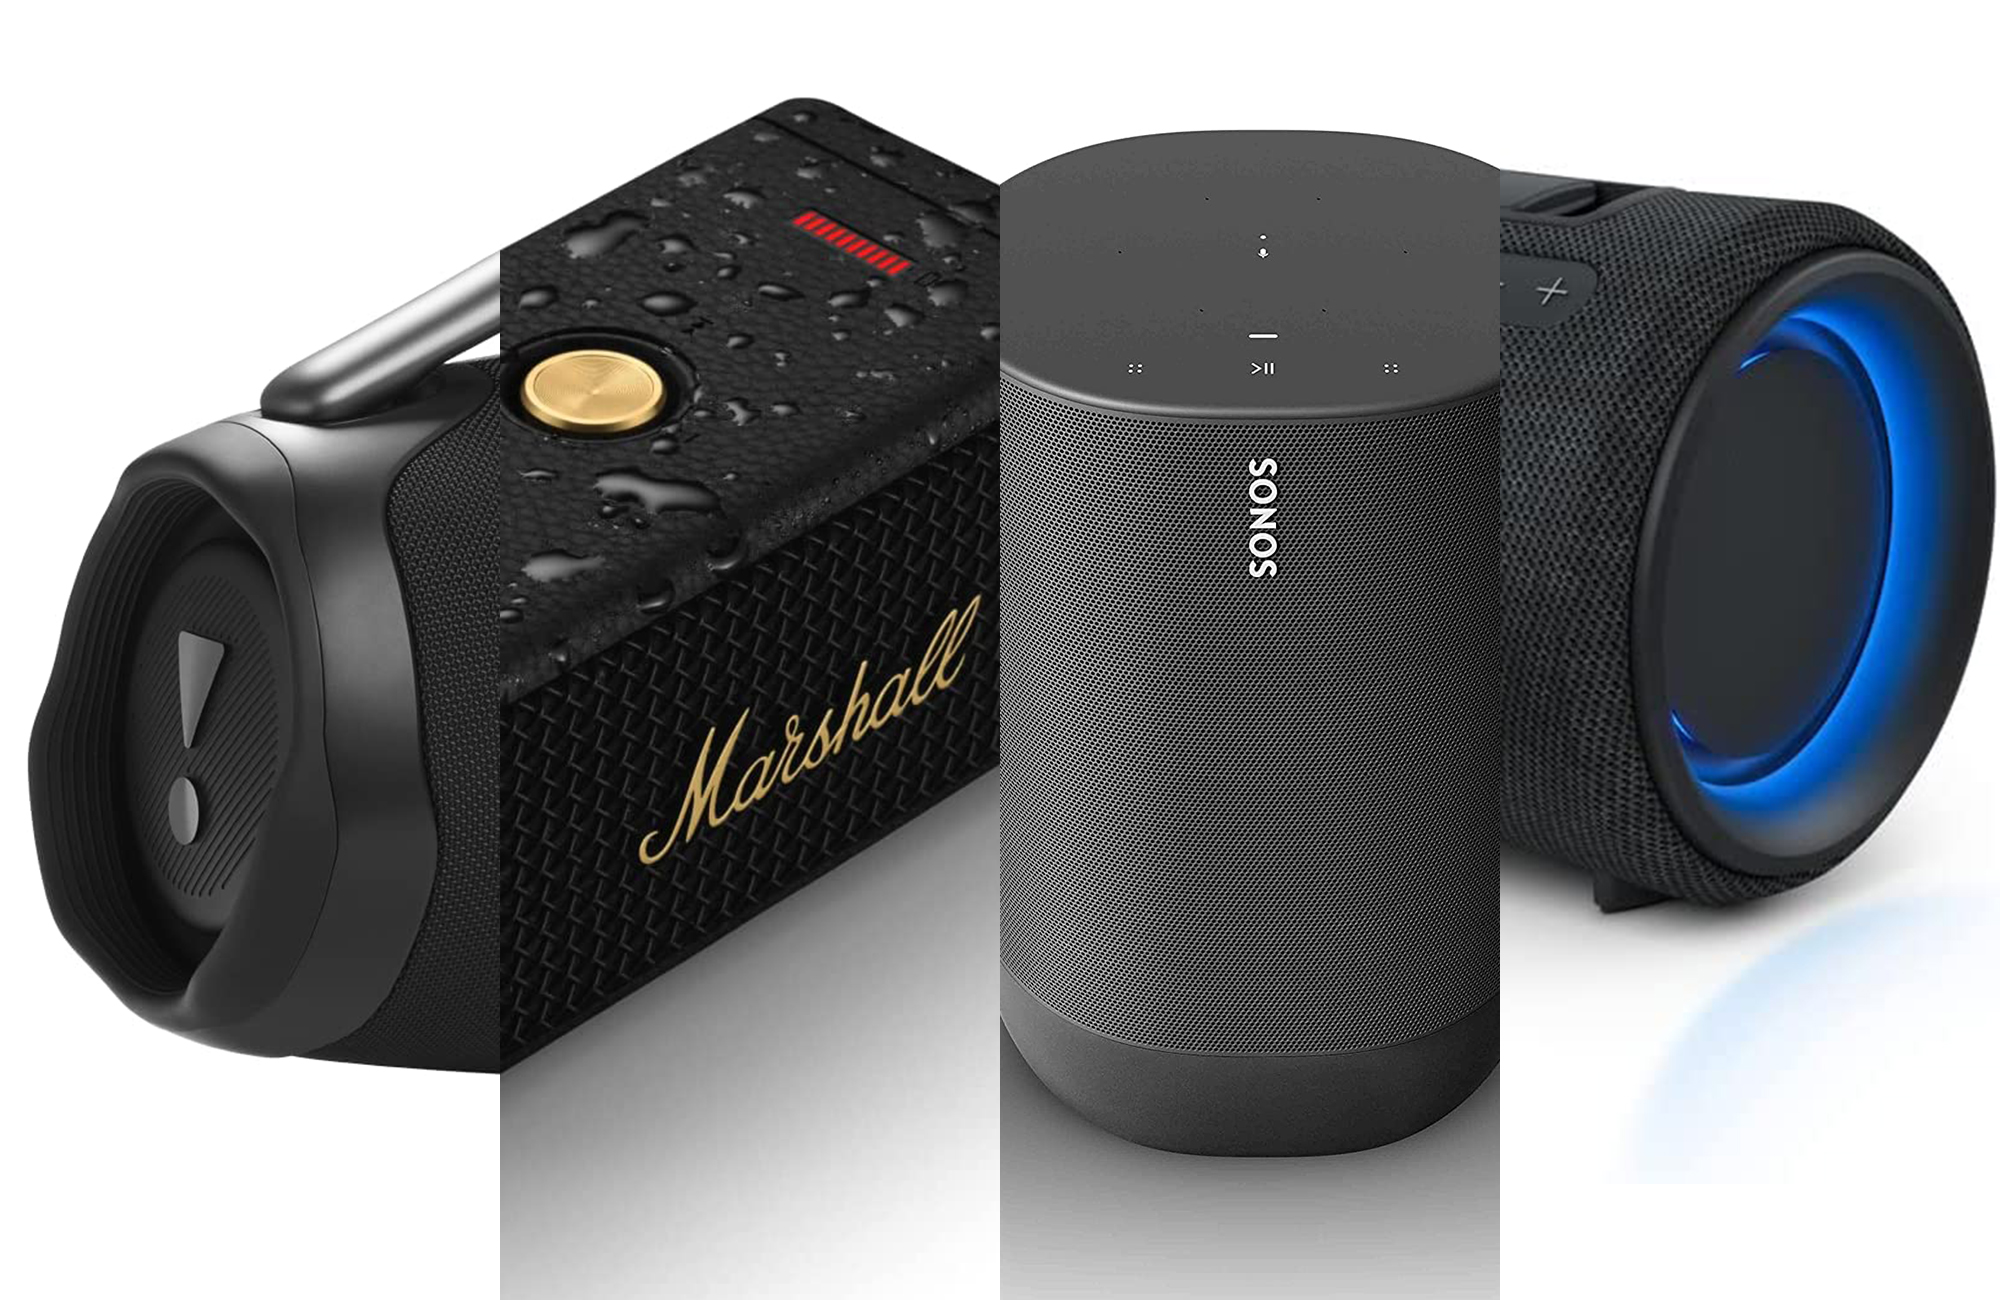 The best Bluetooth speakers, chosen by experts